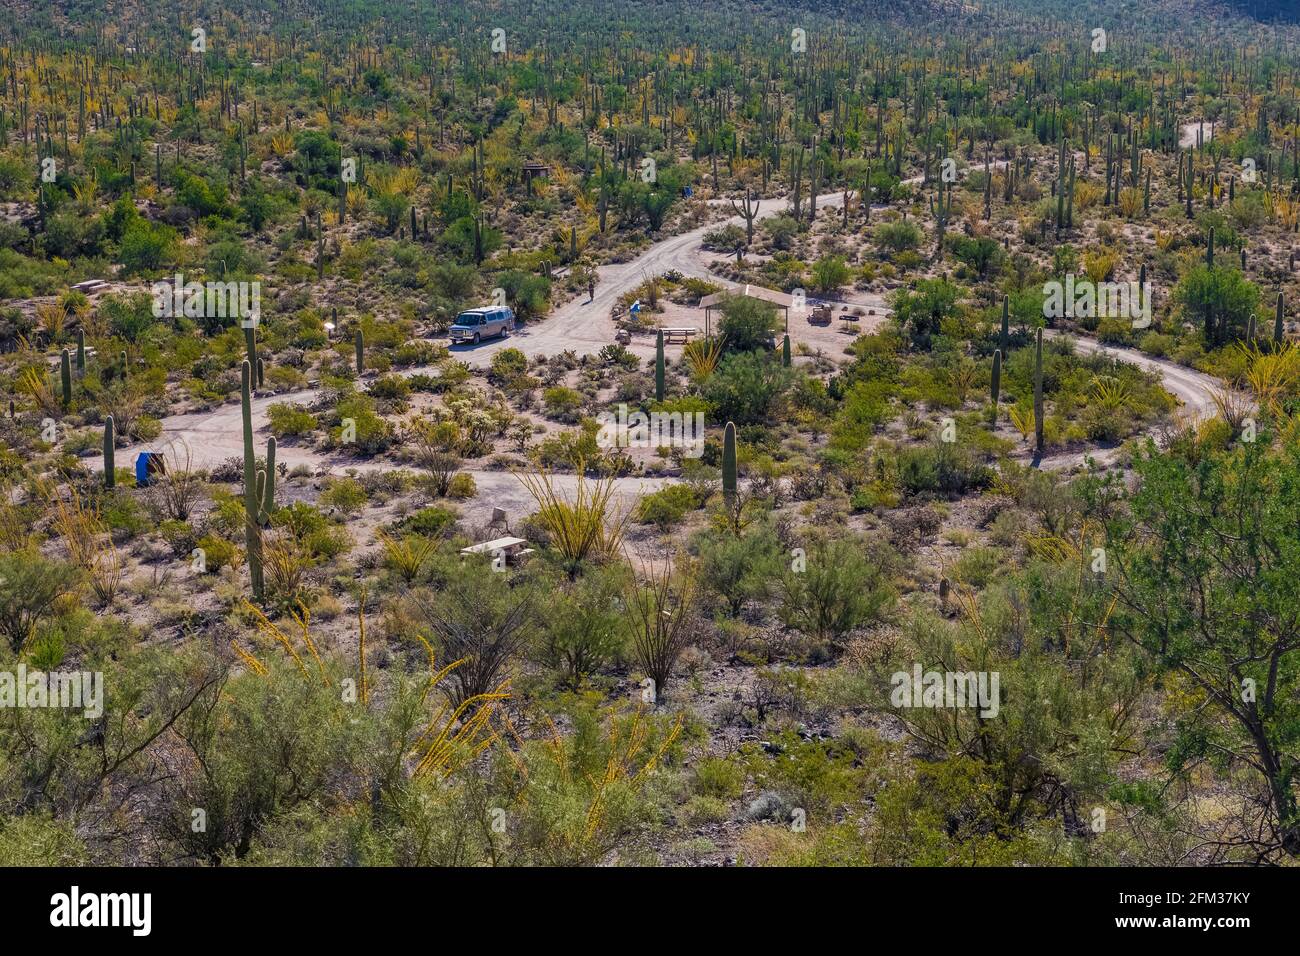 The Sus Picnic Area was developed by the Civilian Conservation Corps during the Great Depression, Saguaro National Park, Tucson Mountain District, Ari Stock Photo